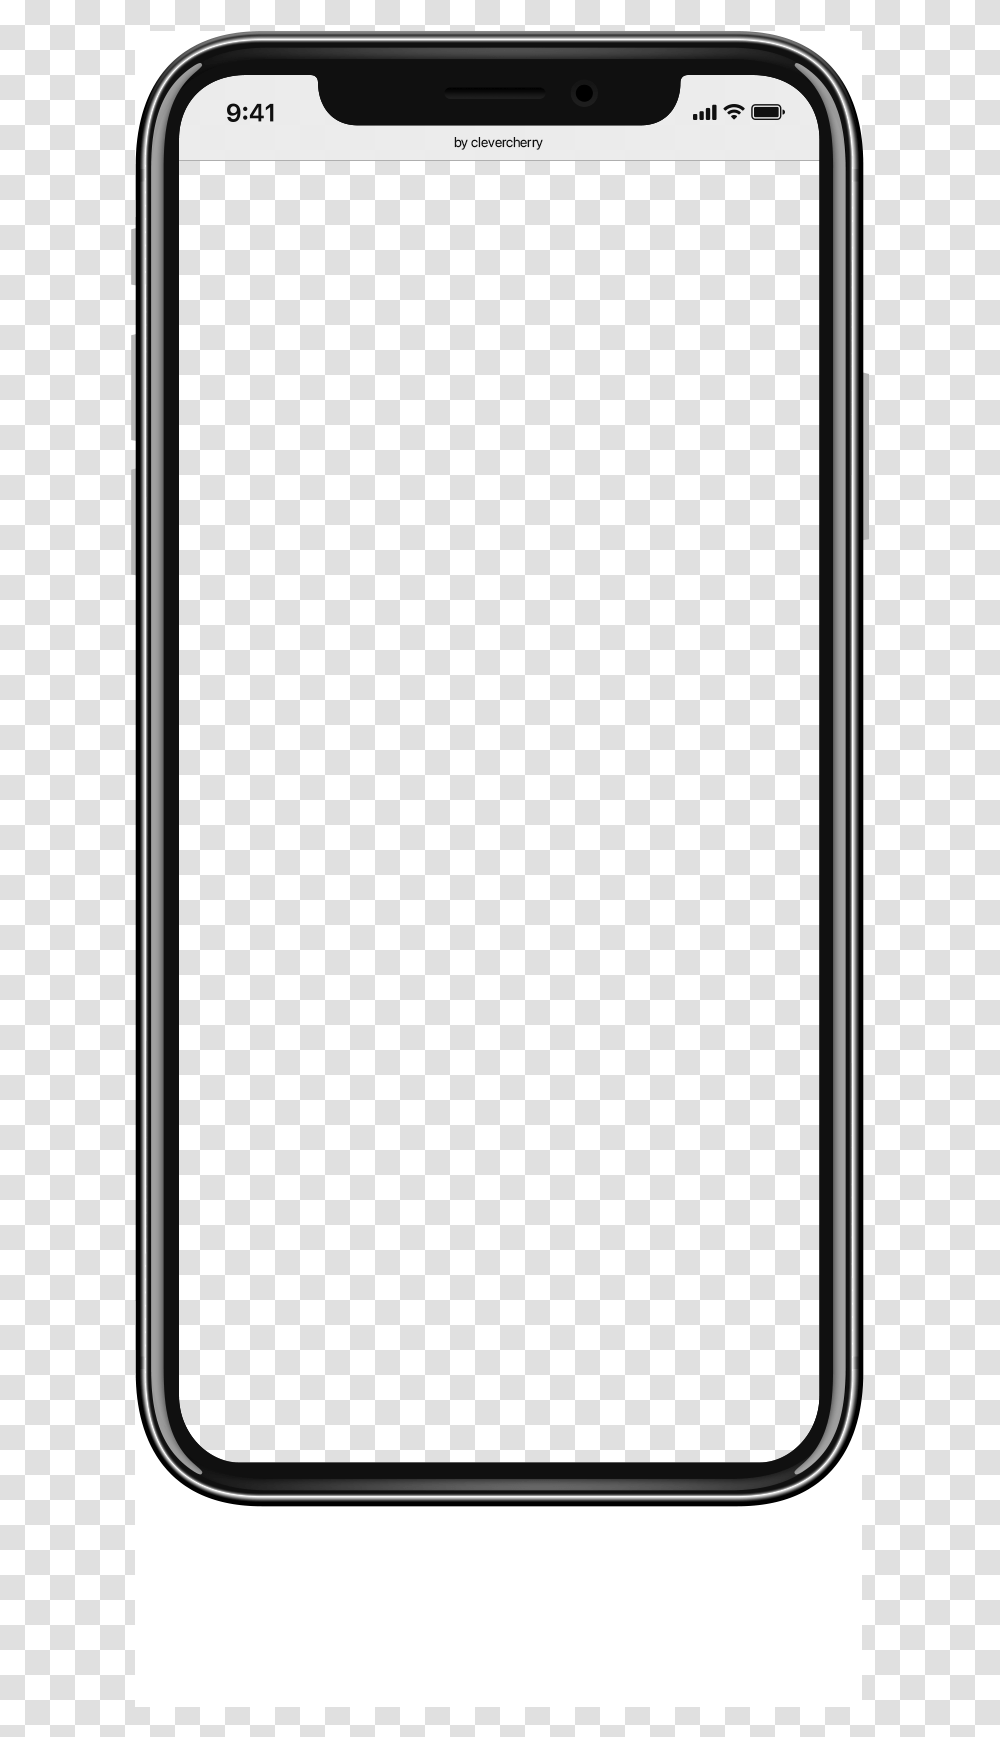 Iphone X 2018 10 23 Download Full Art Pokemon Cards Template, Mobile Phone, Electronics, Cell Phone Transparent Png